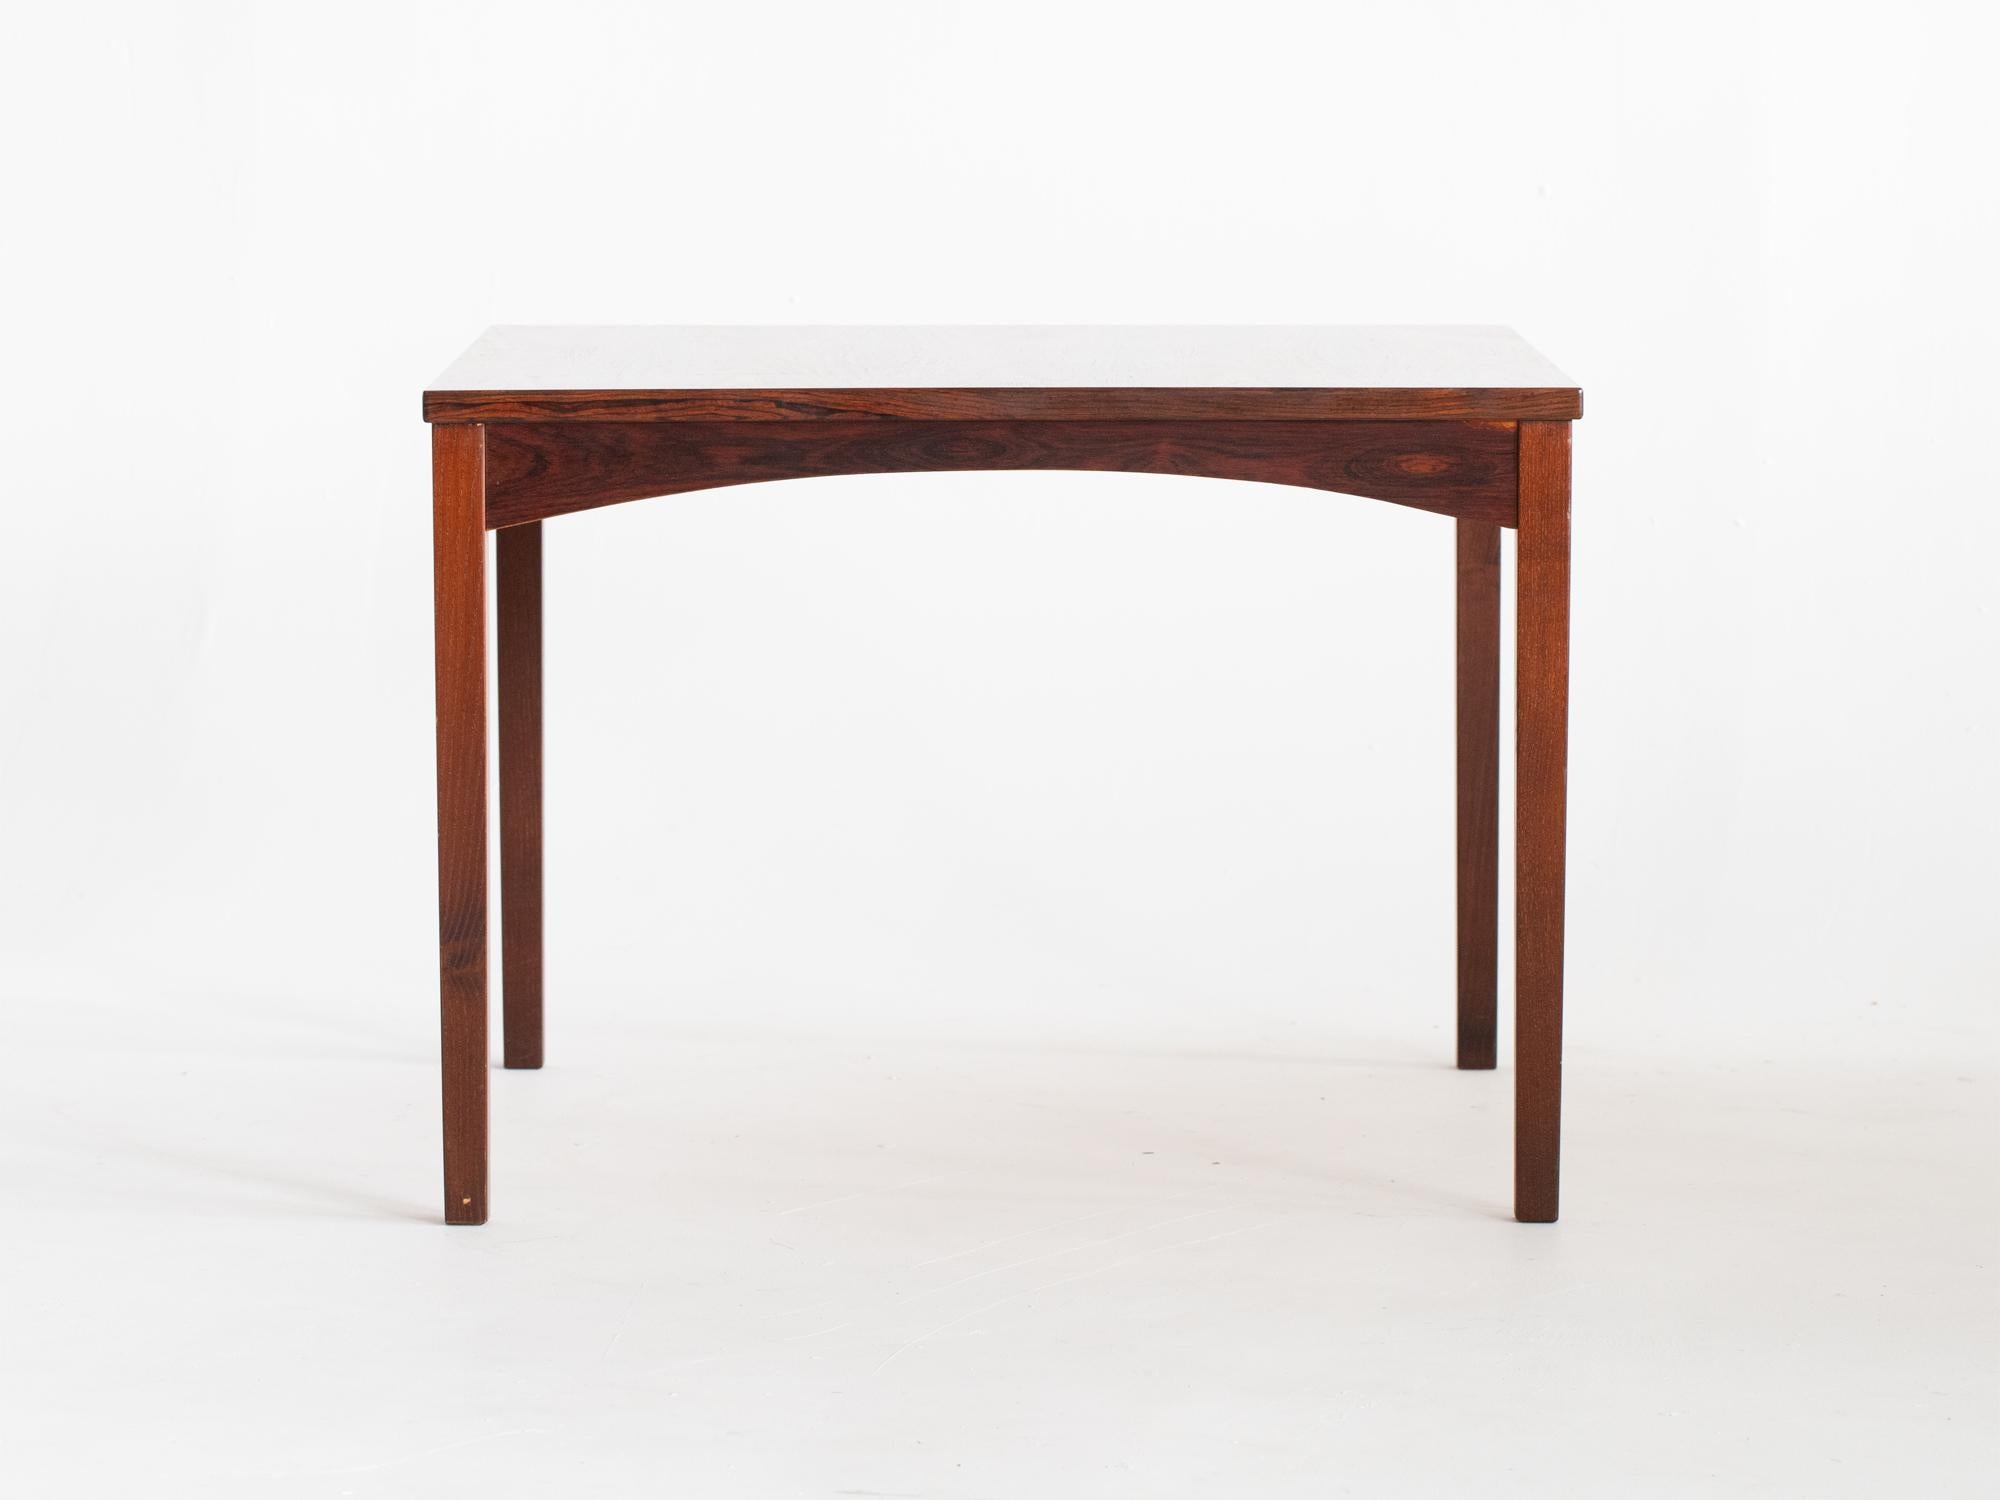 A mid-century rosewood-veneered square coffee table. Swedish, c. 1960s.

In good clean order with minimal wear.

51 x 70 x 70 cm

20.1 x 27.6 x 27.6 